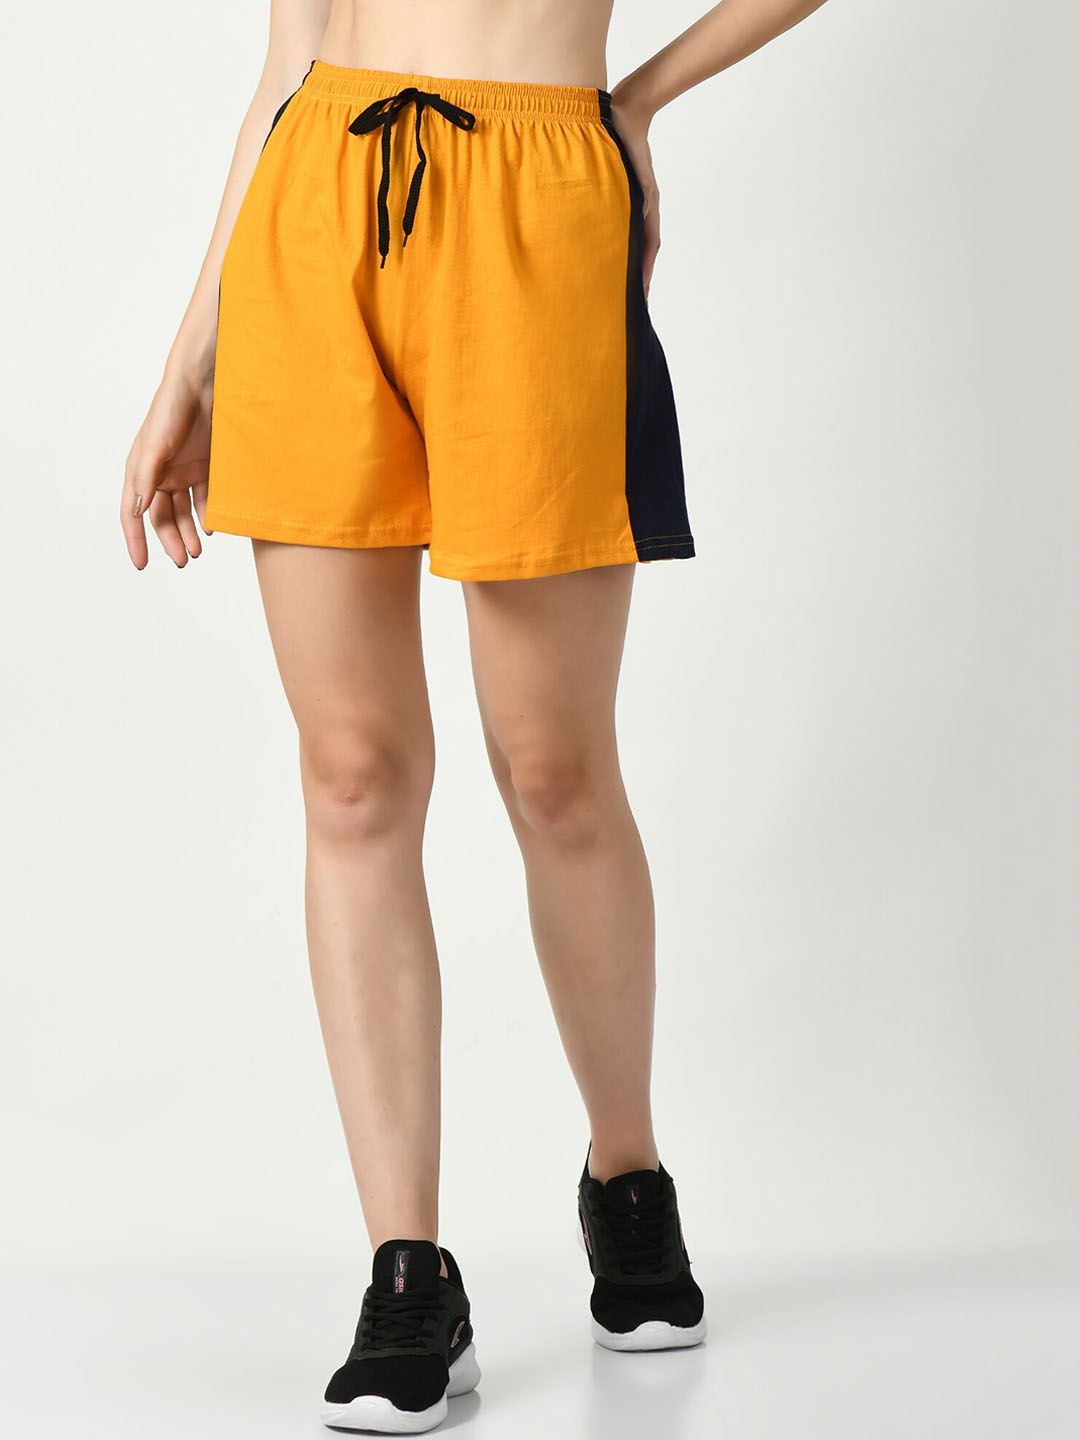 BAESD Women High-Rise Pure Cotton Shorts Price in India